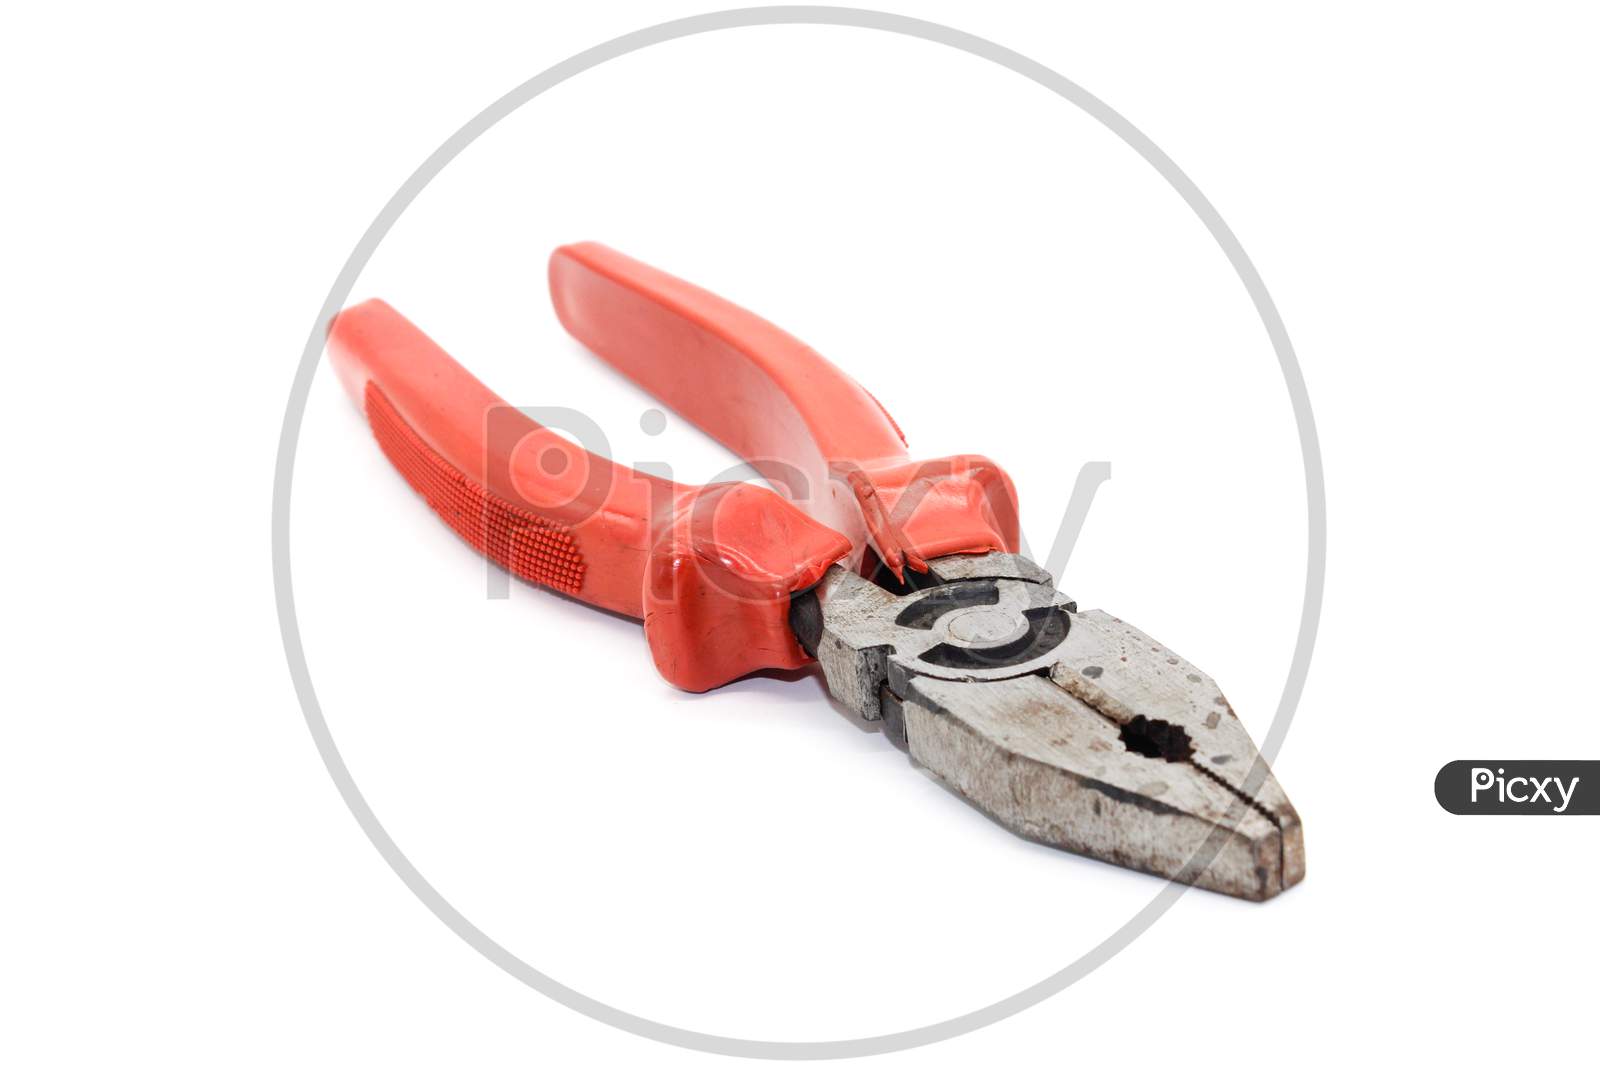 A Picture Of Wire Cutter Isolated On White Background